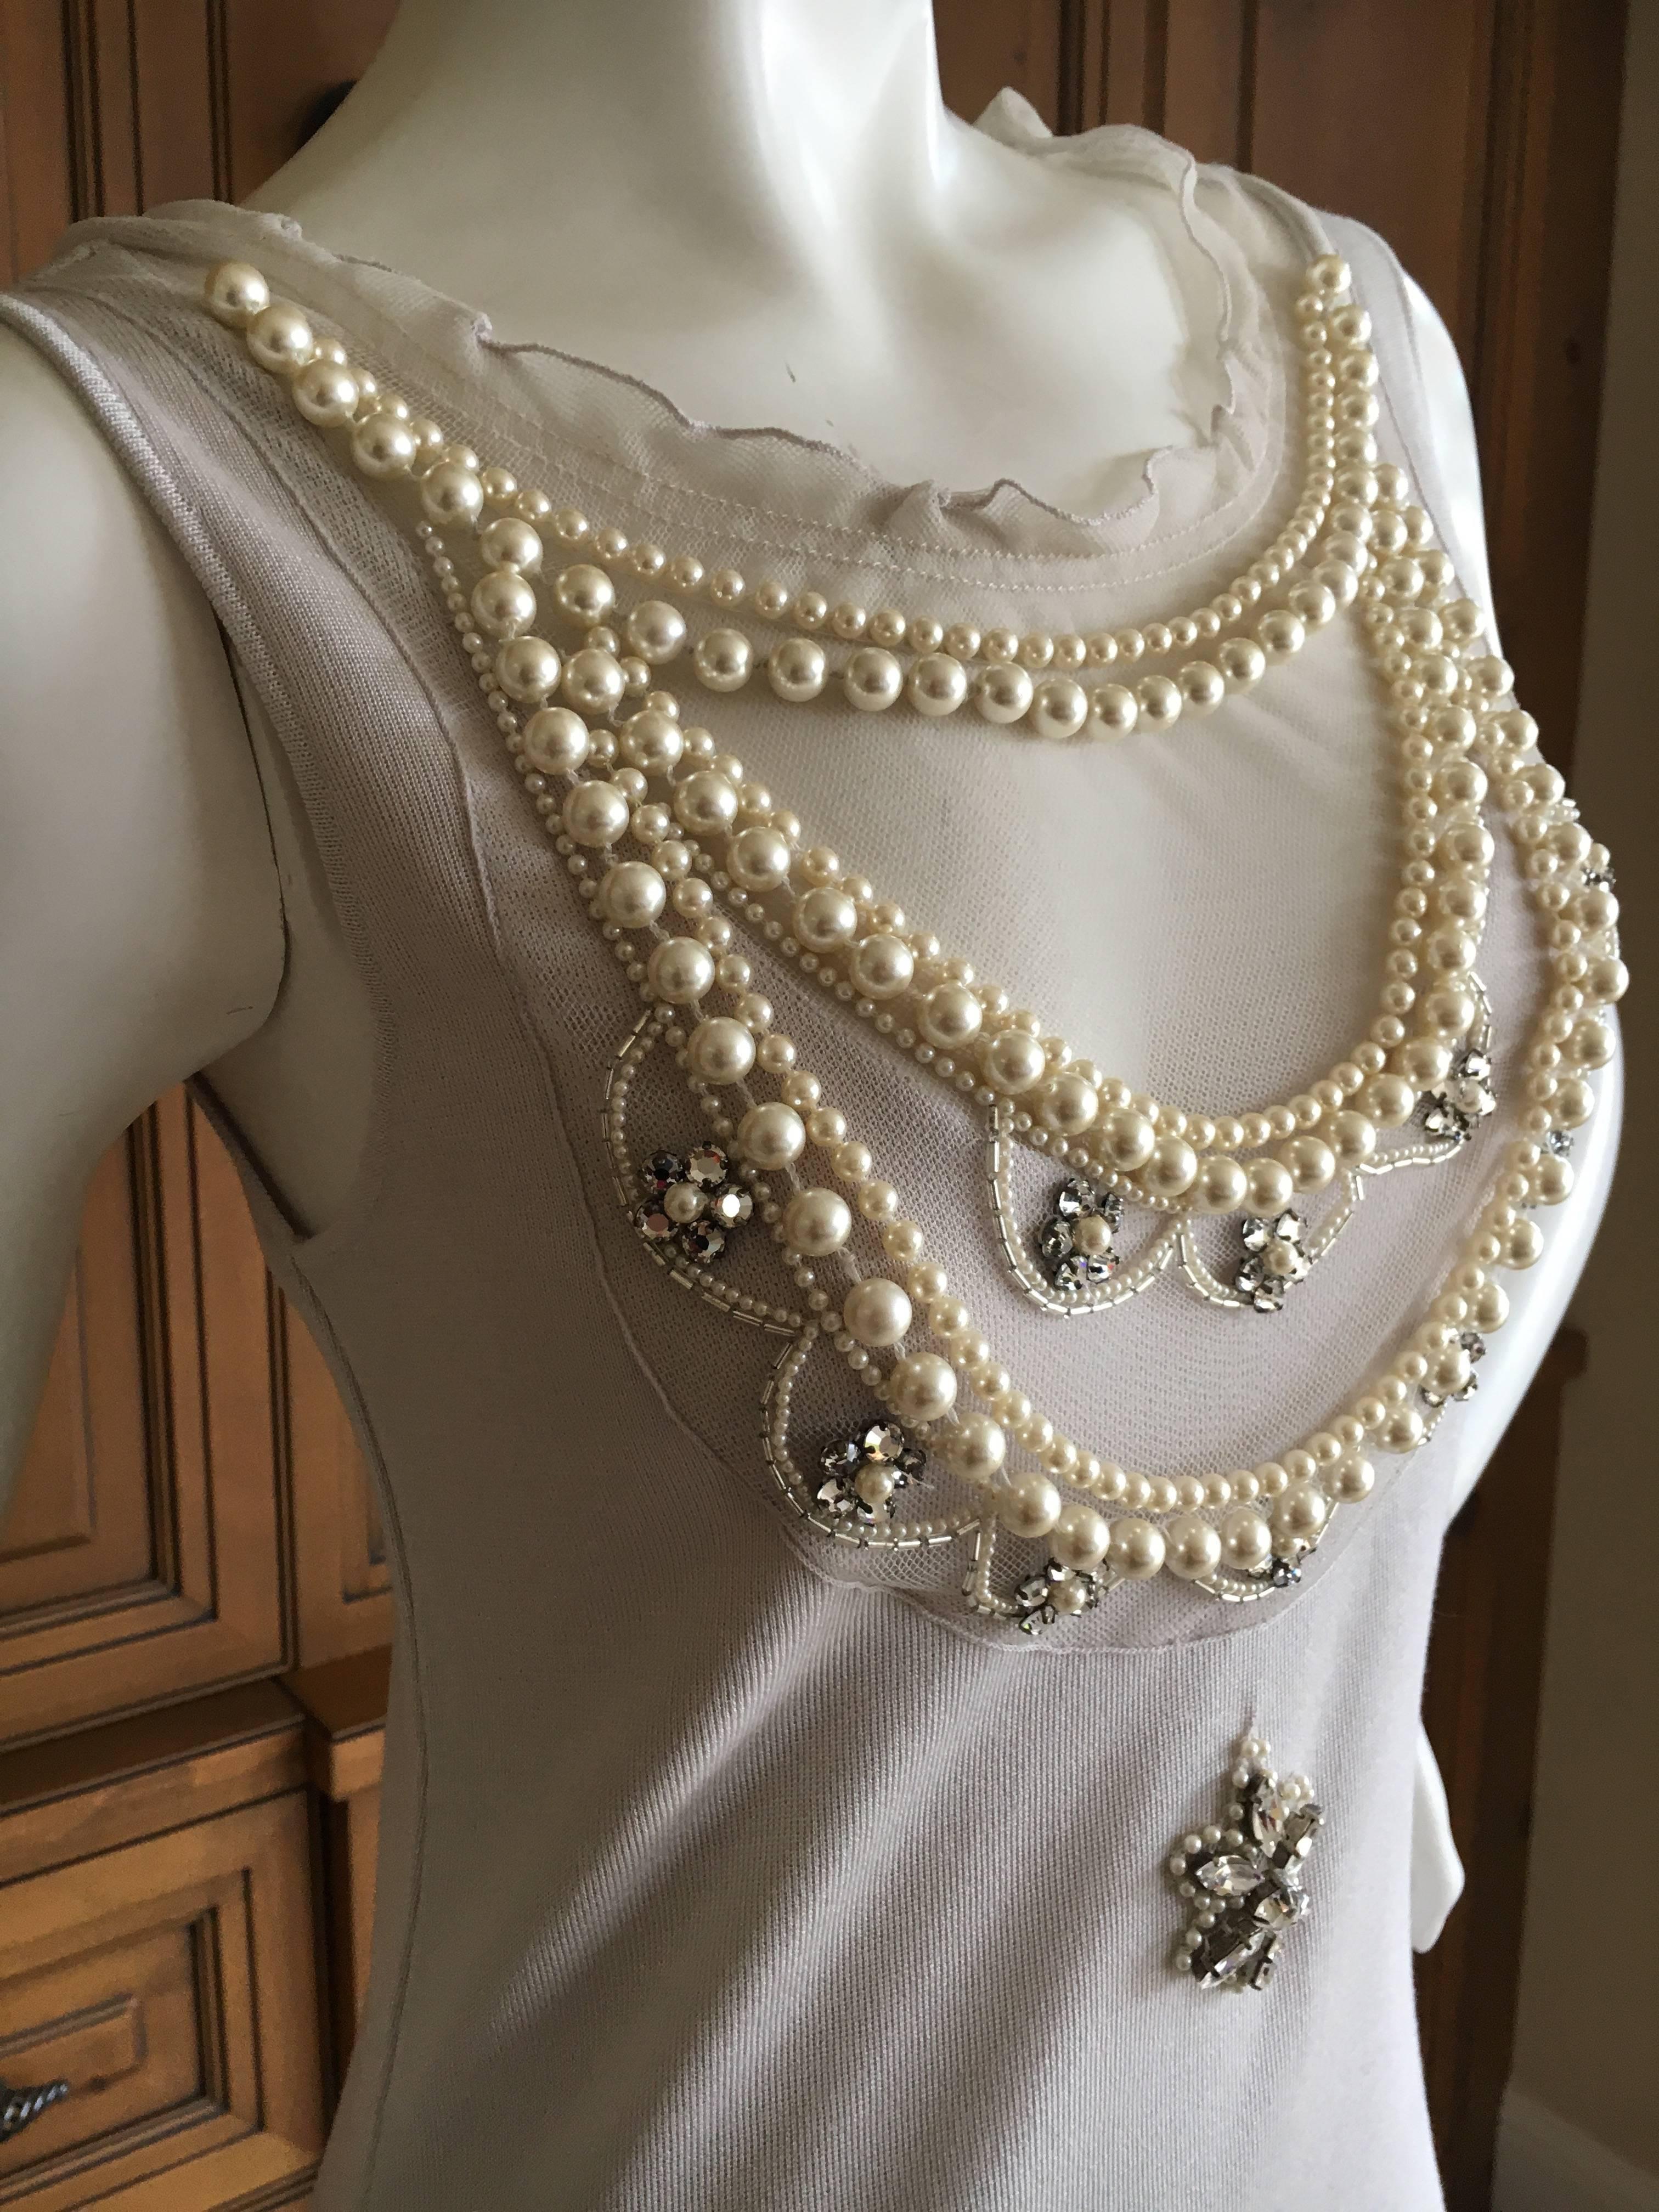 Women's Christian Dior Chic Silk Dress with Lesage Trompe-l'œil Pearl and Crystal Jewels